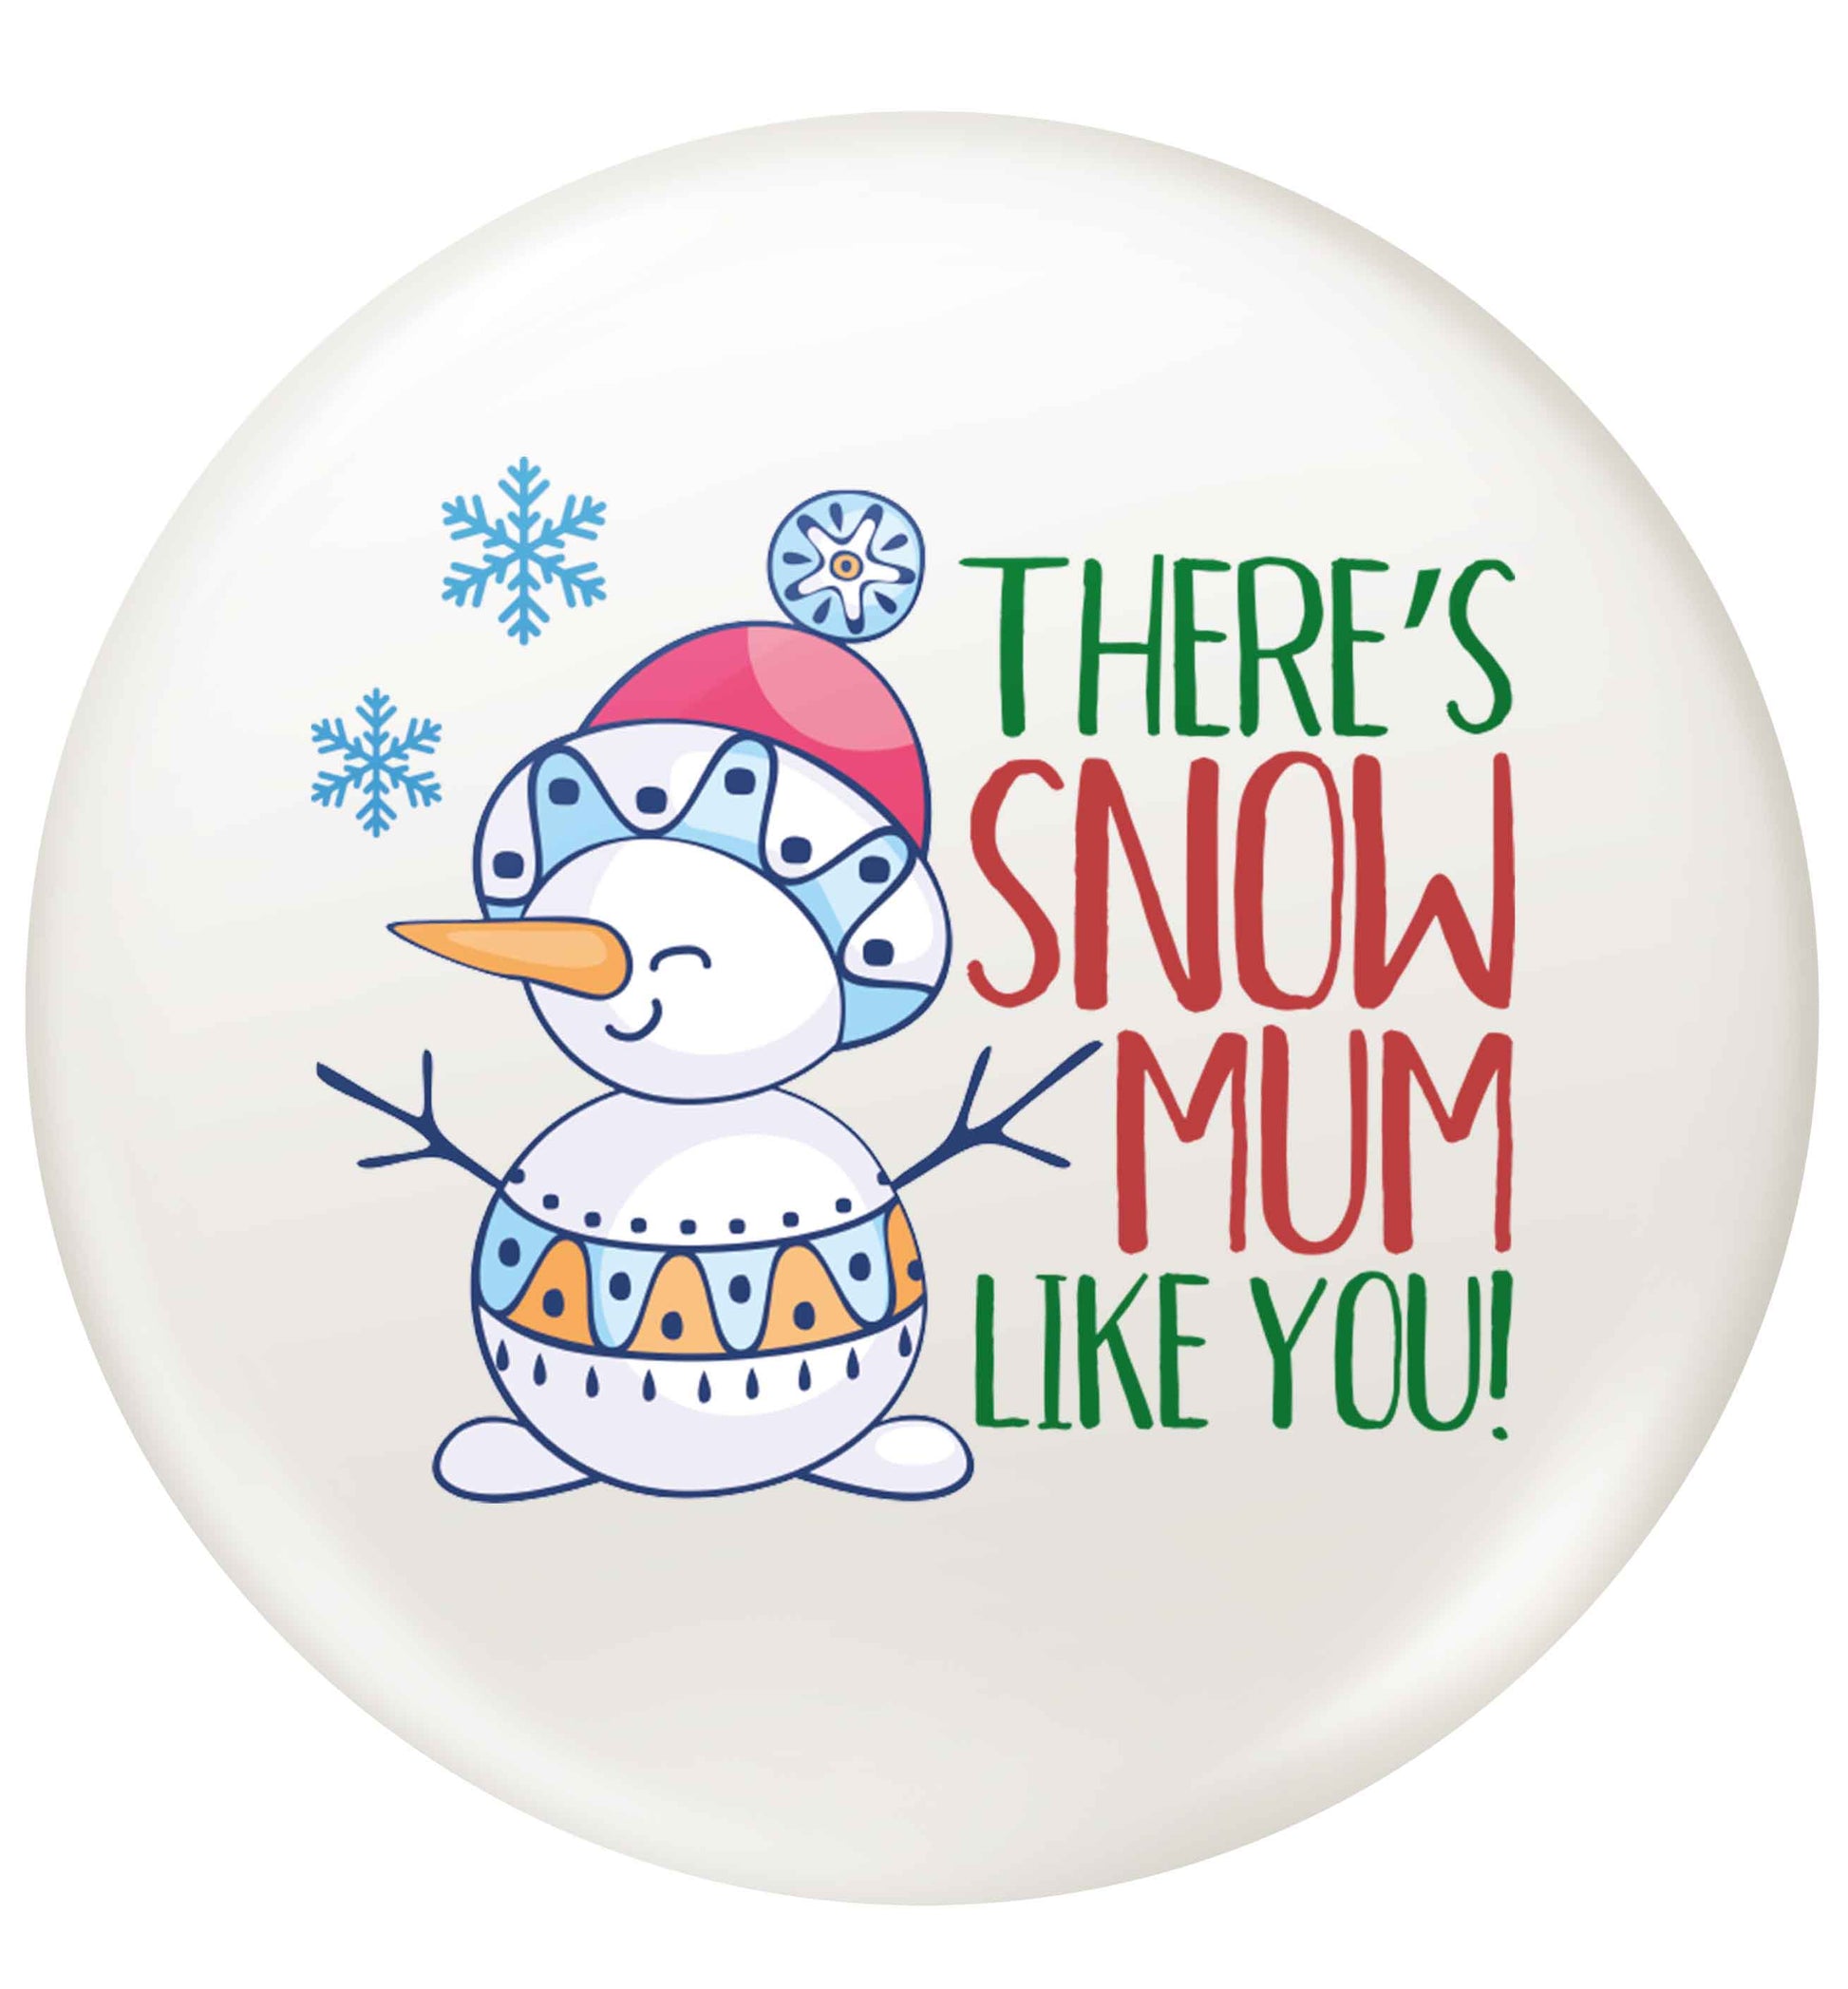 There's snow mum like you small 25mm Pin badge